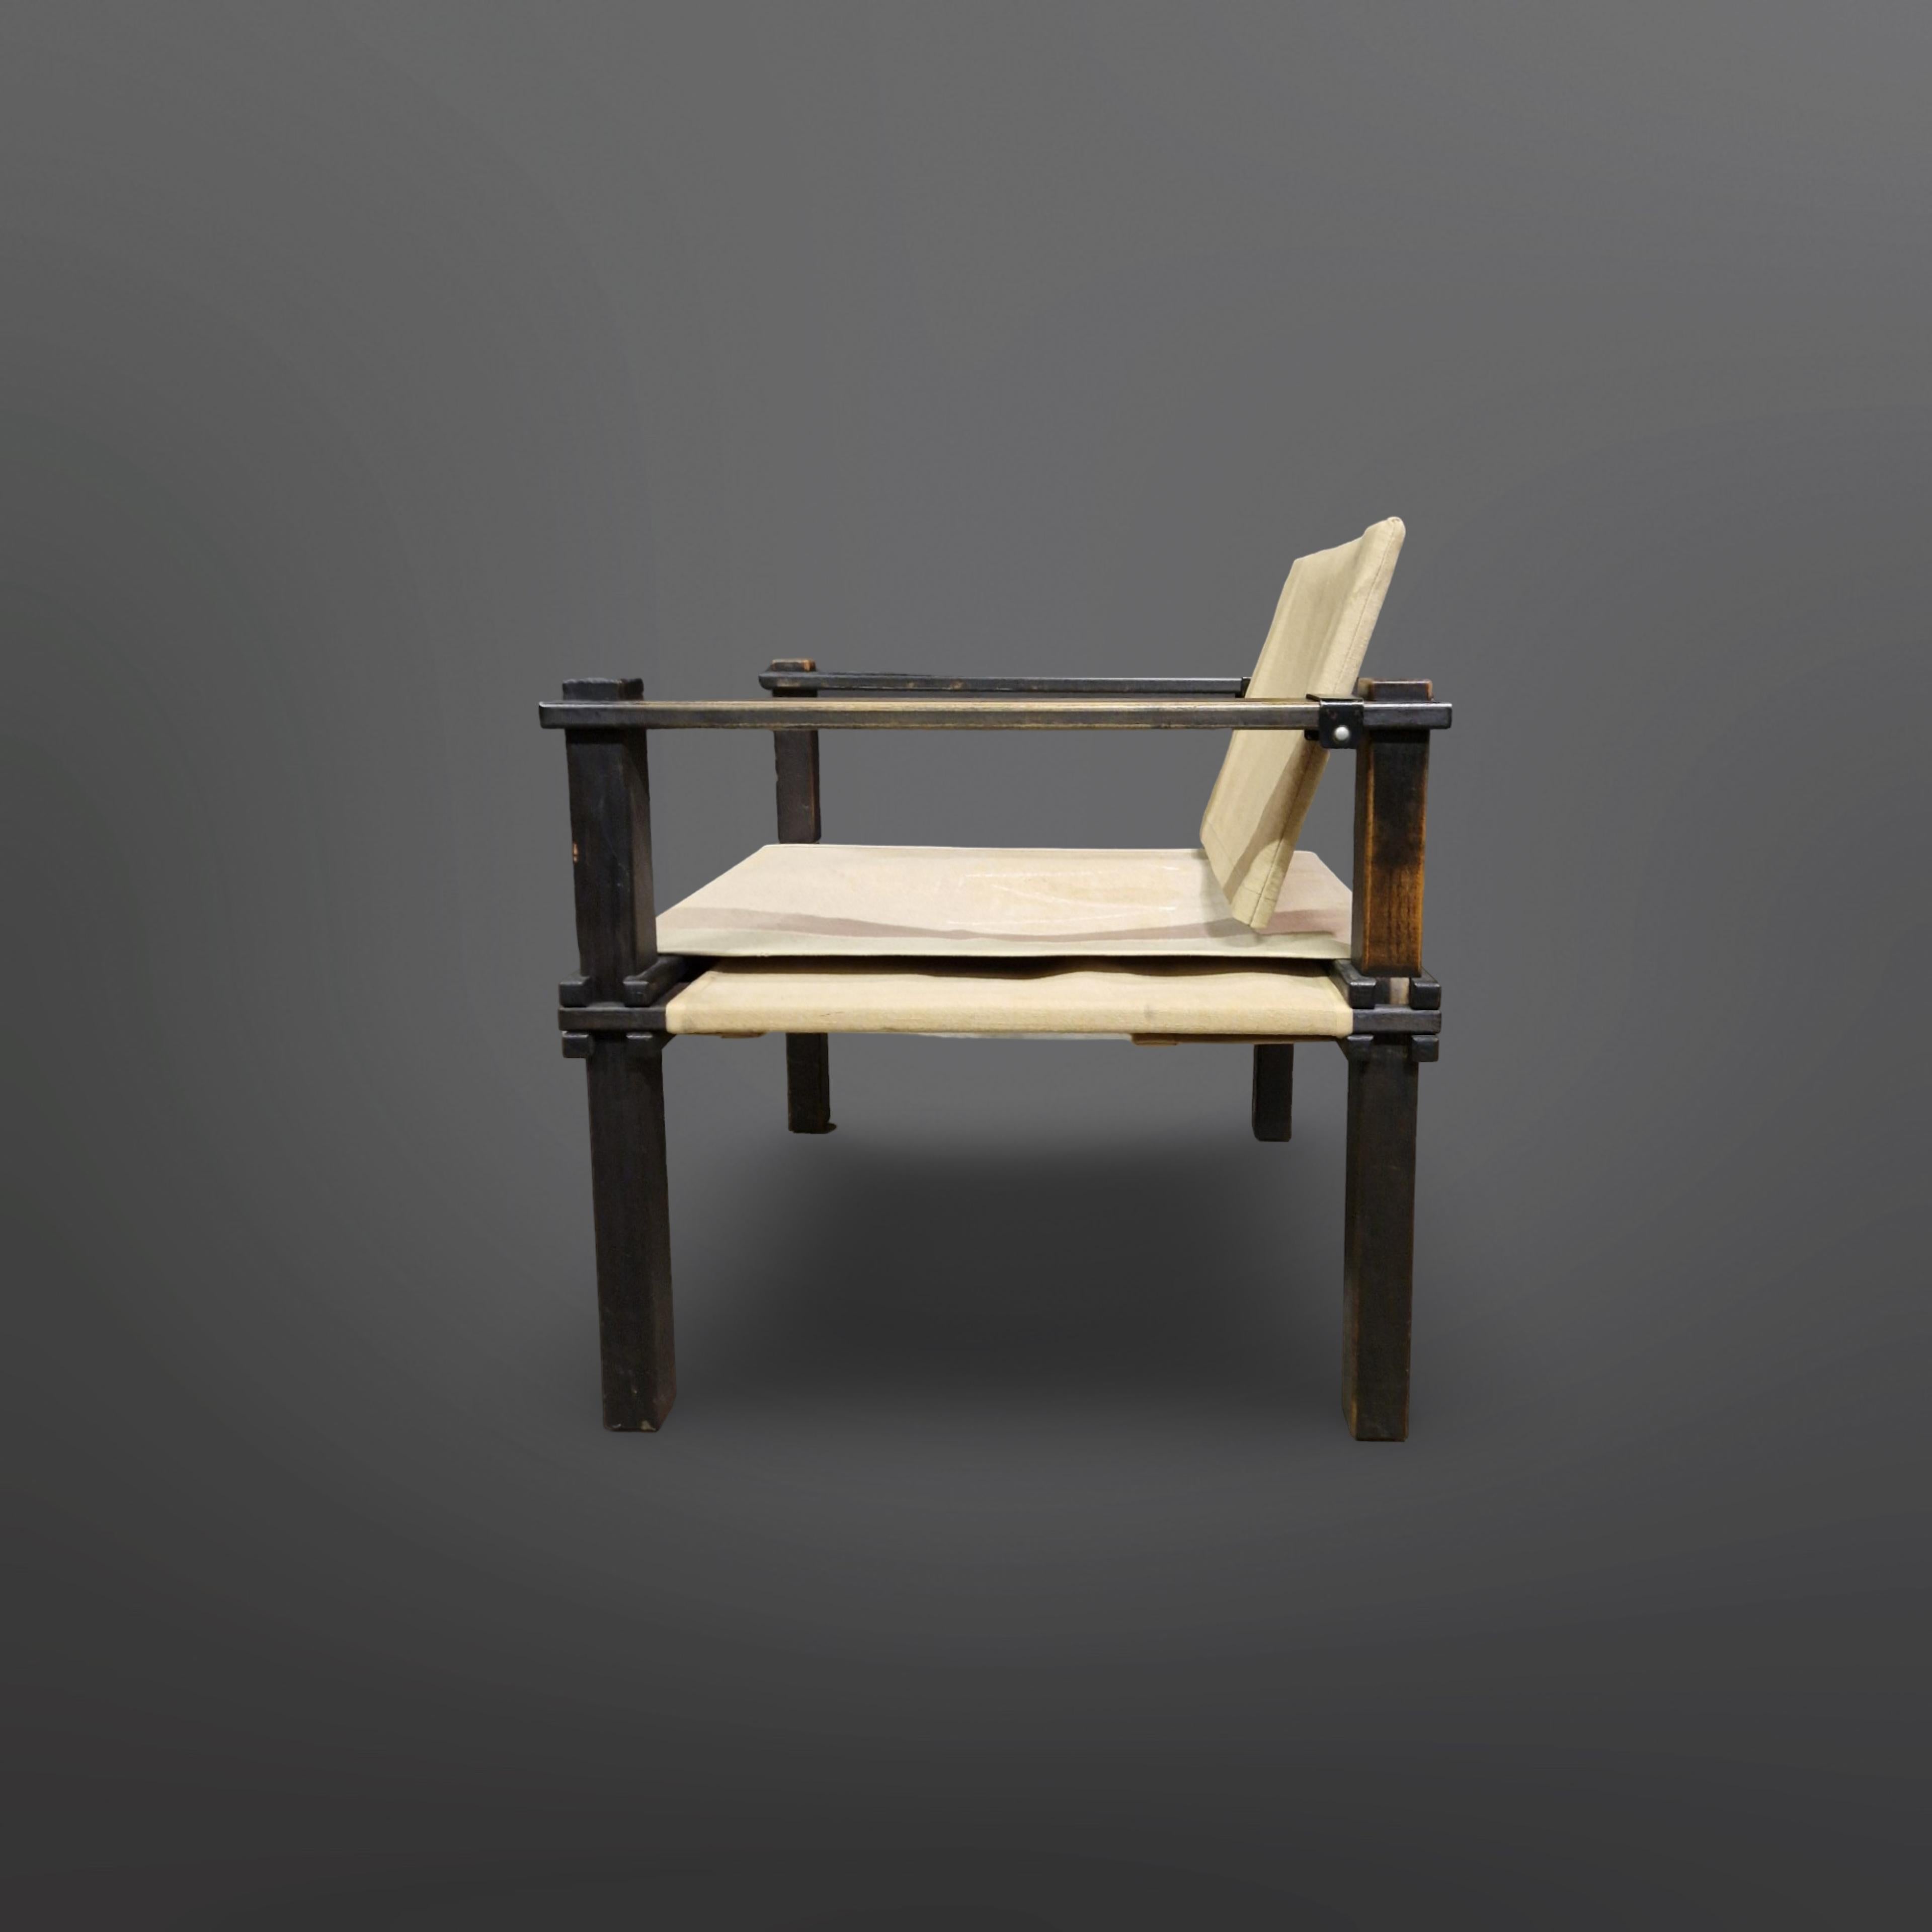 Original farmer chair and table by Gerd Lange for Bofinger, Germany 1960s For Sale 6